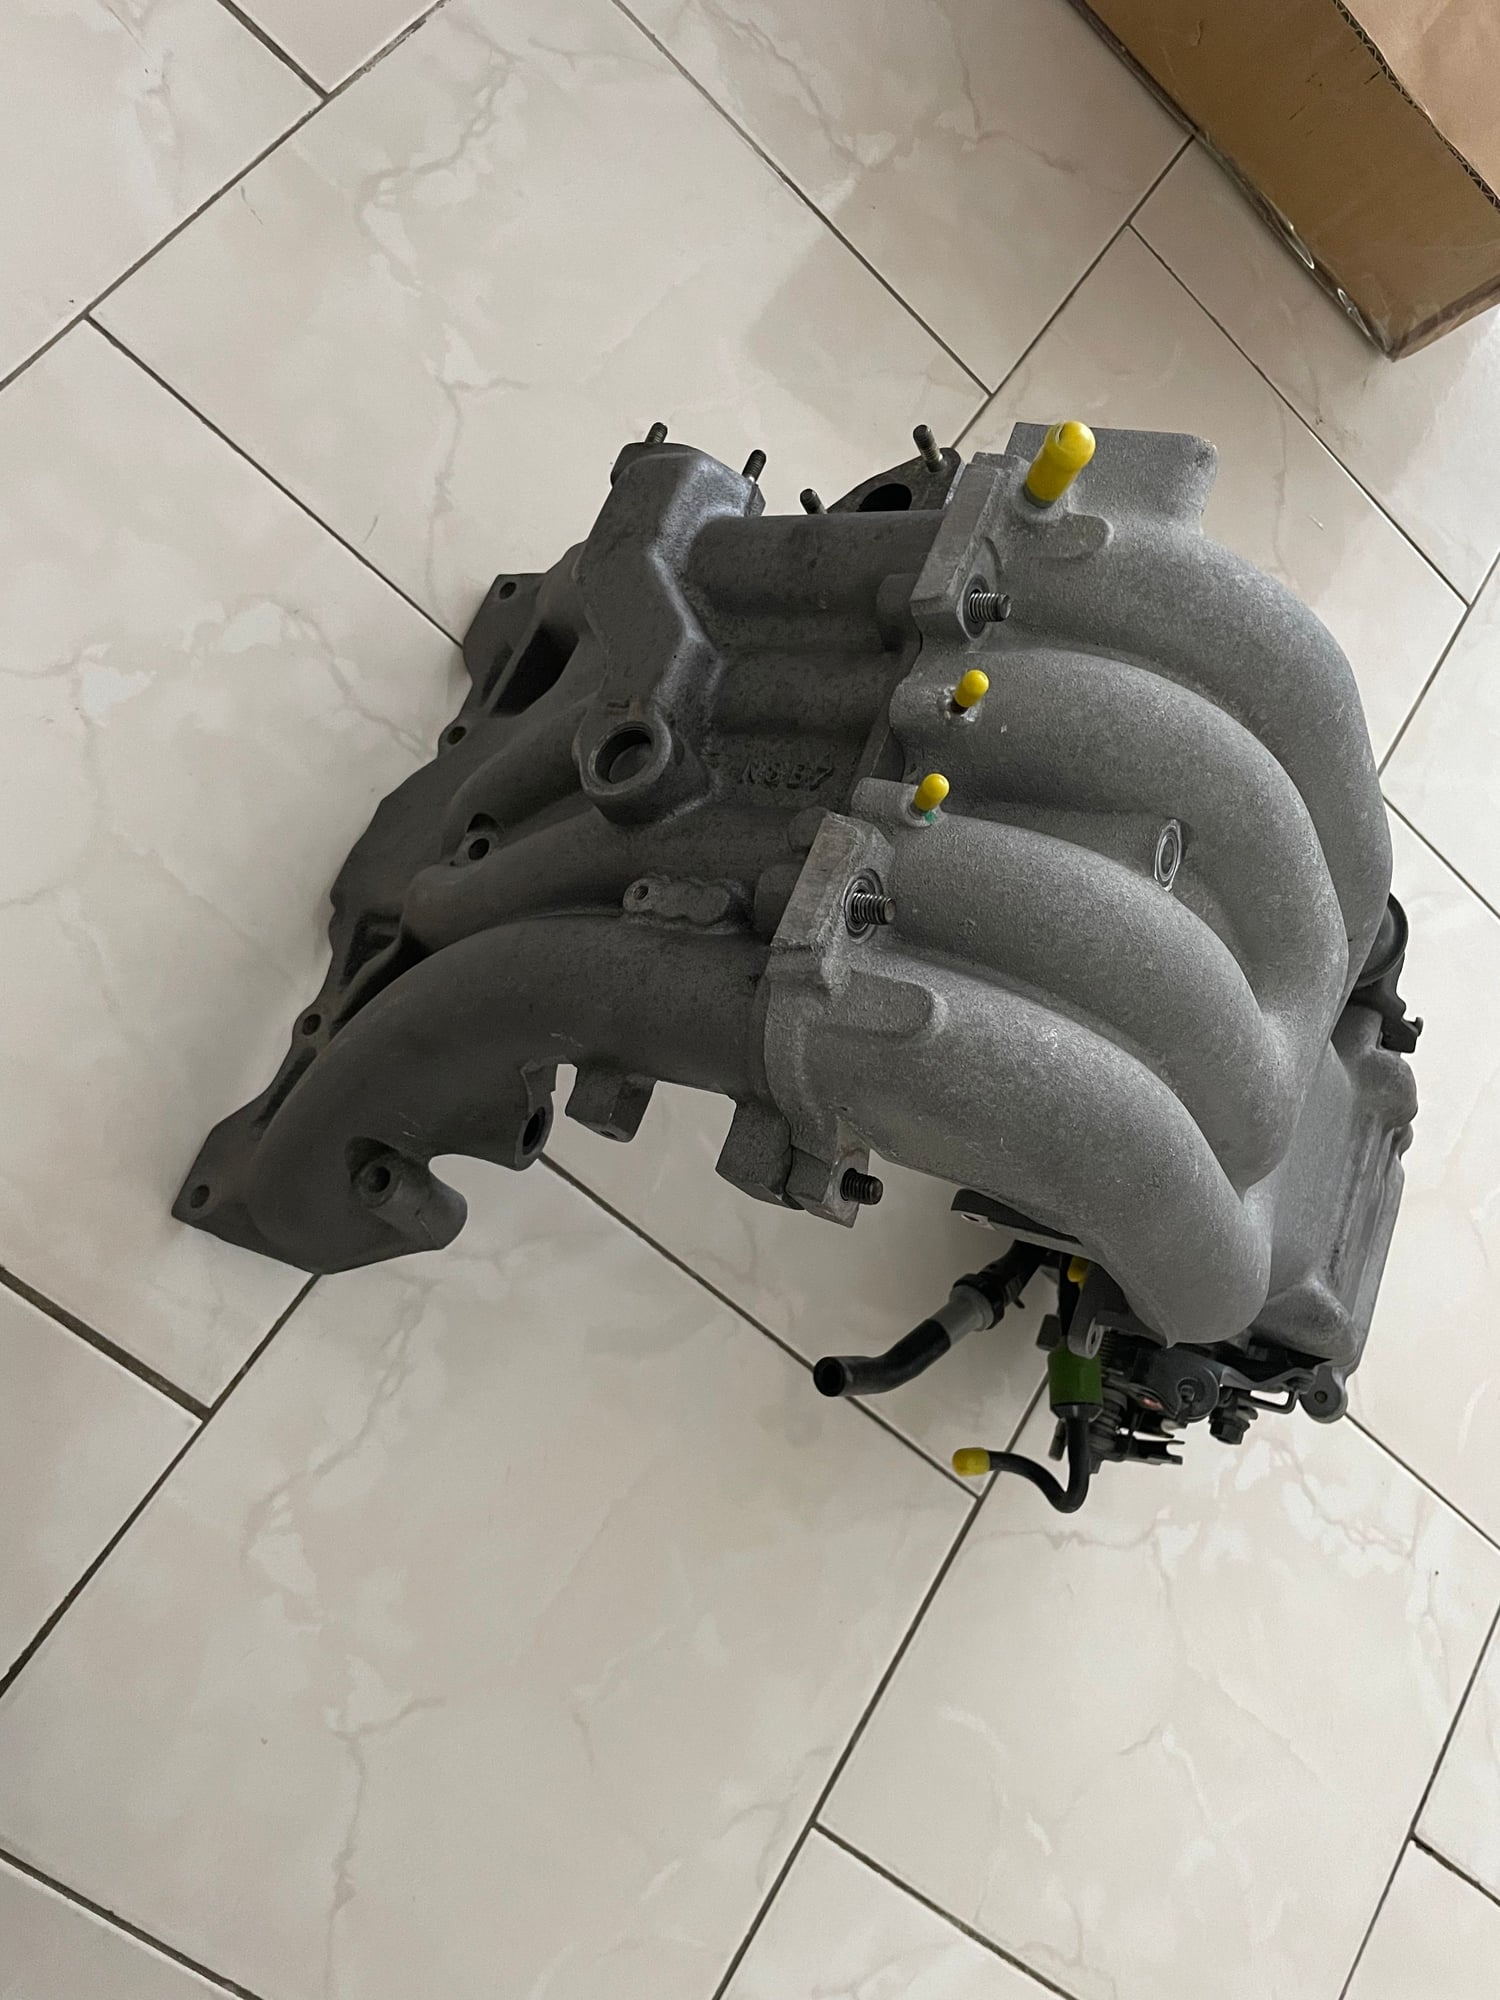 Engine - Intake/Fuel - Fd3s intake manifold upper and lower - Used - 1992 to 2002 Mazda RX-7 - Sydney, Australia